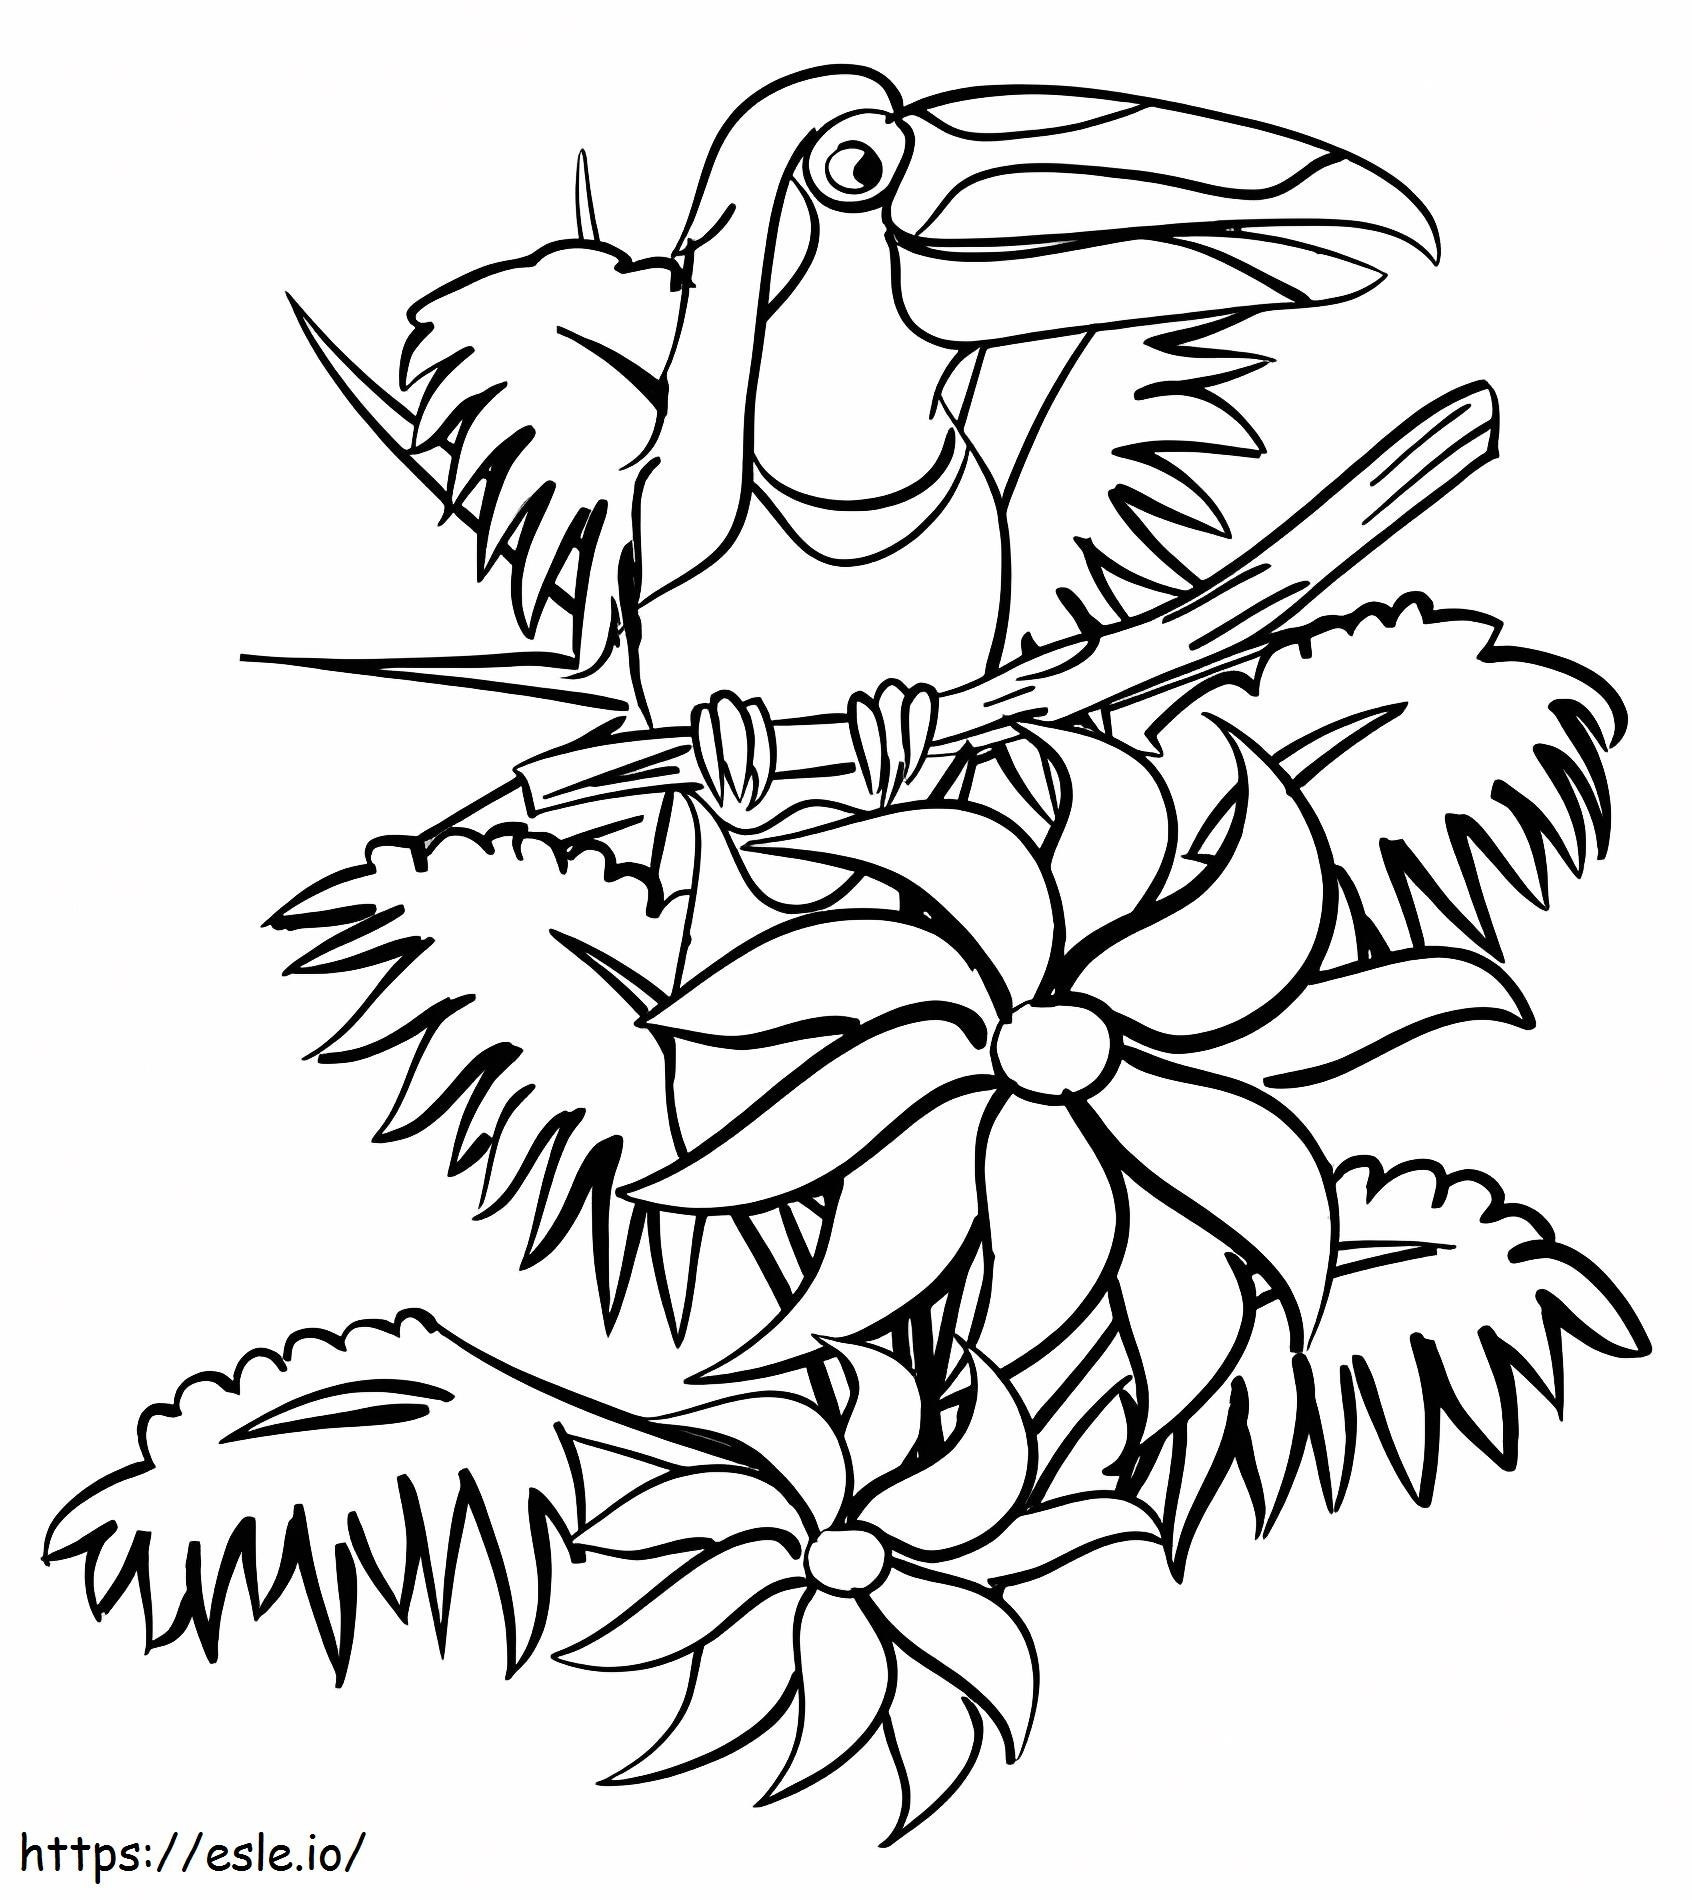 Toucan In The Jungle coloring page